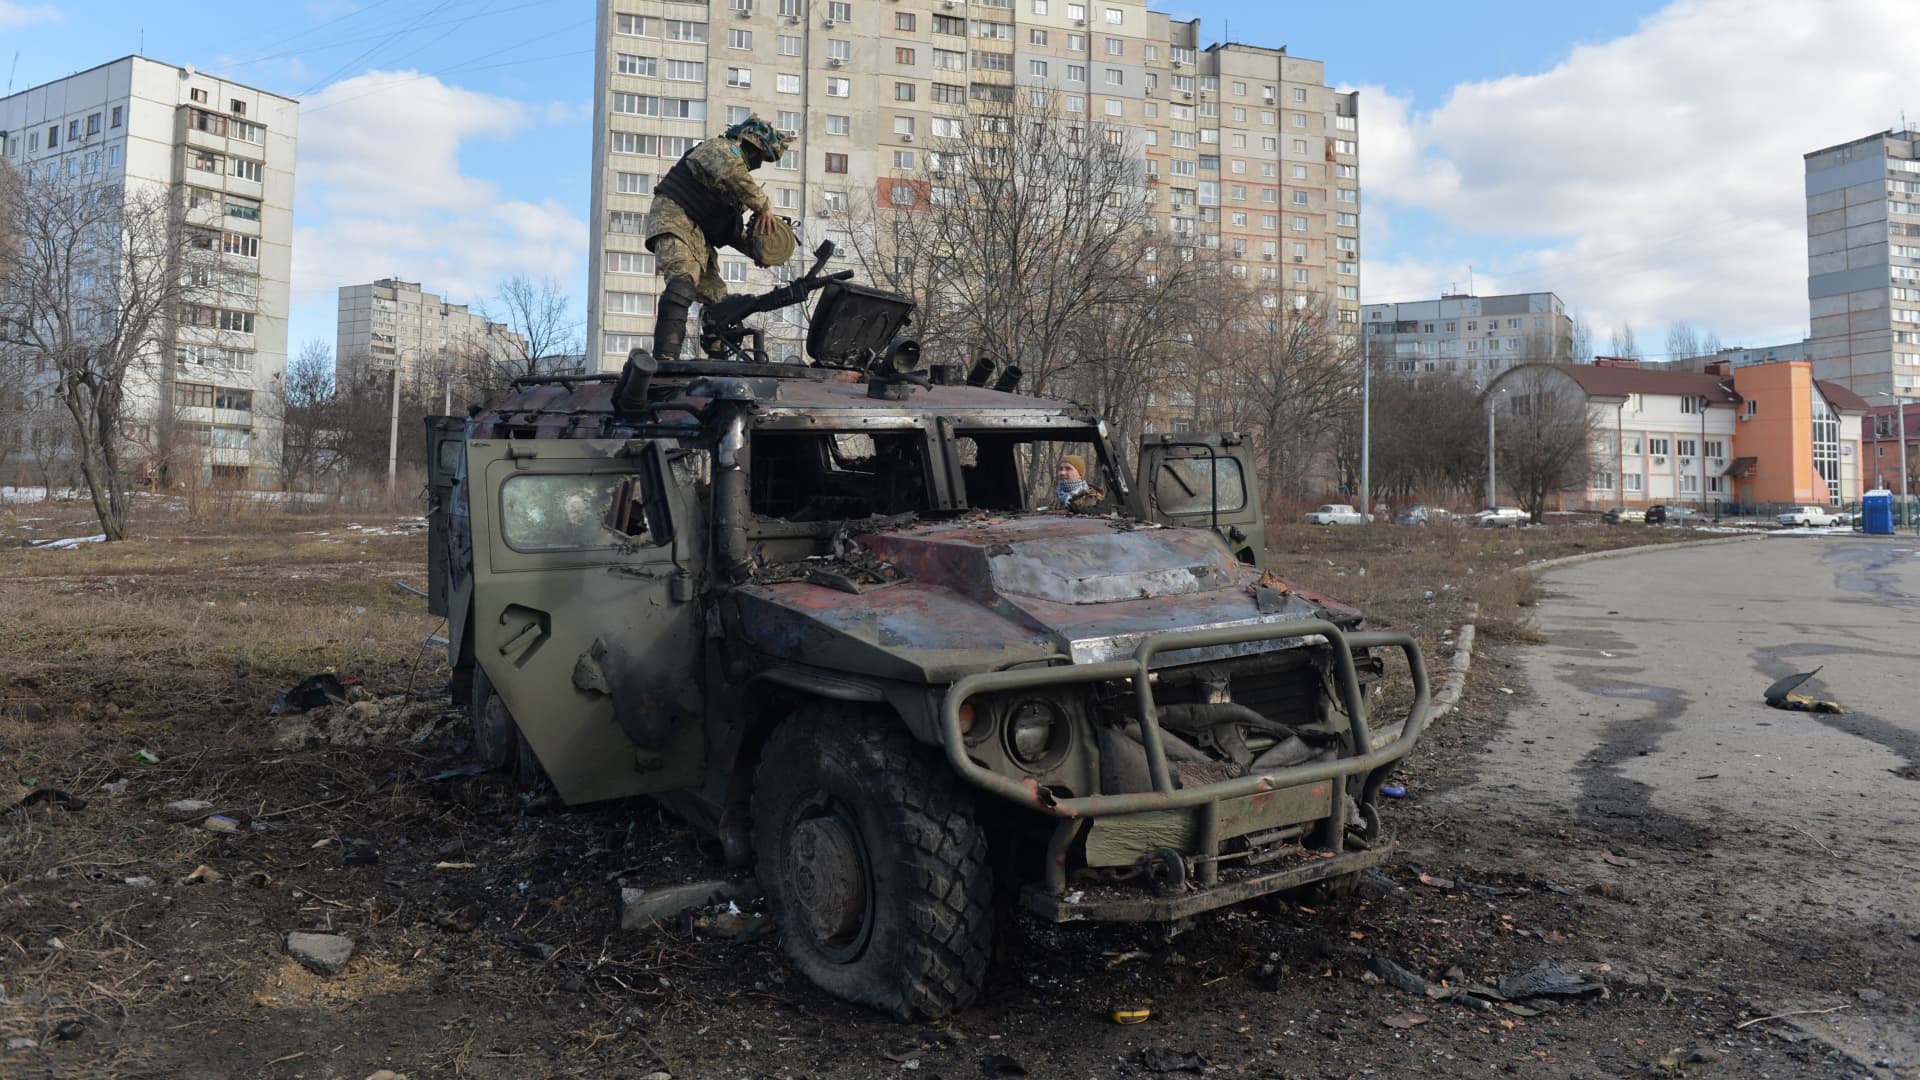 An Ukrainian Territorial Defence fighter examines a destroyed Russian infantry mobility vehicle GAZ Tigr after the fight in Kharkiv on February 27, 2022.